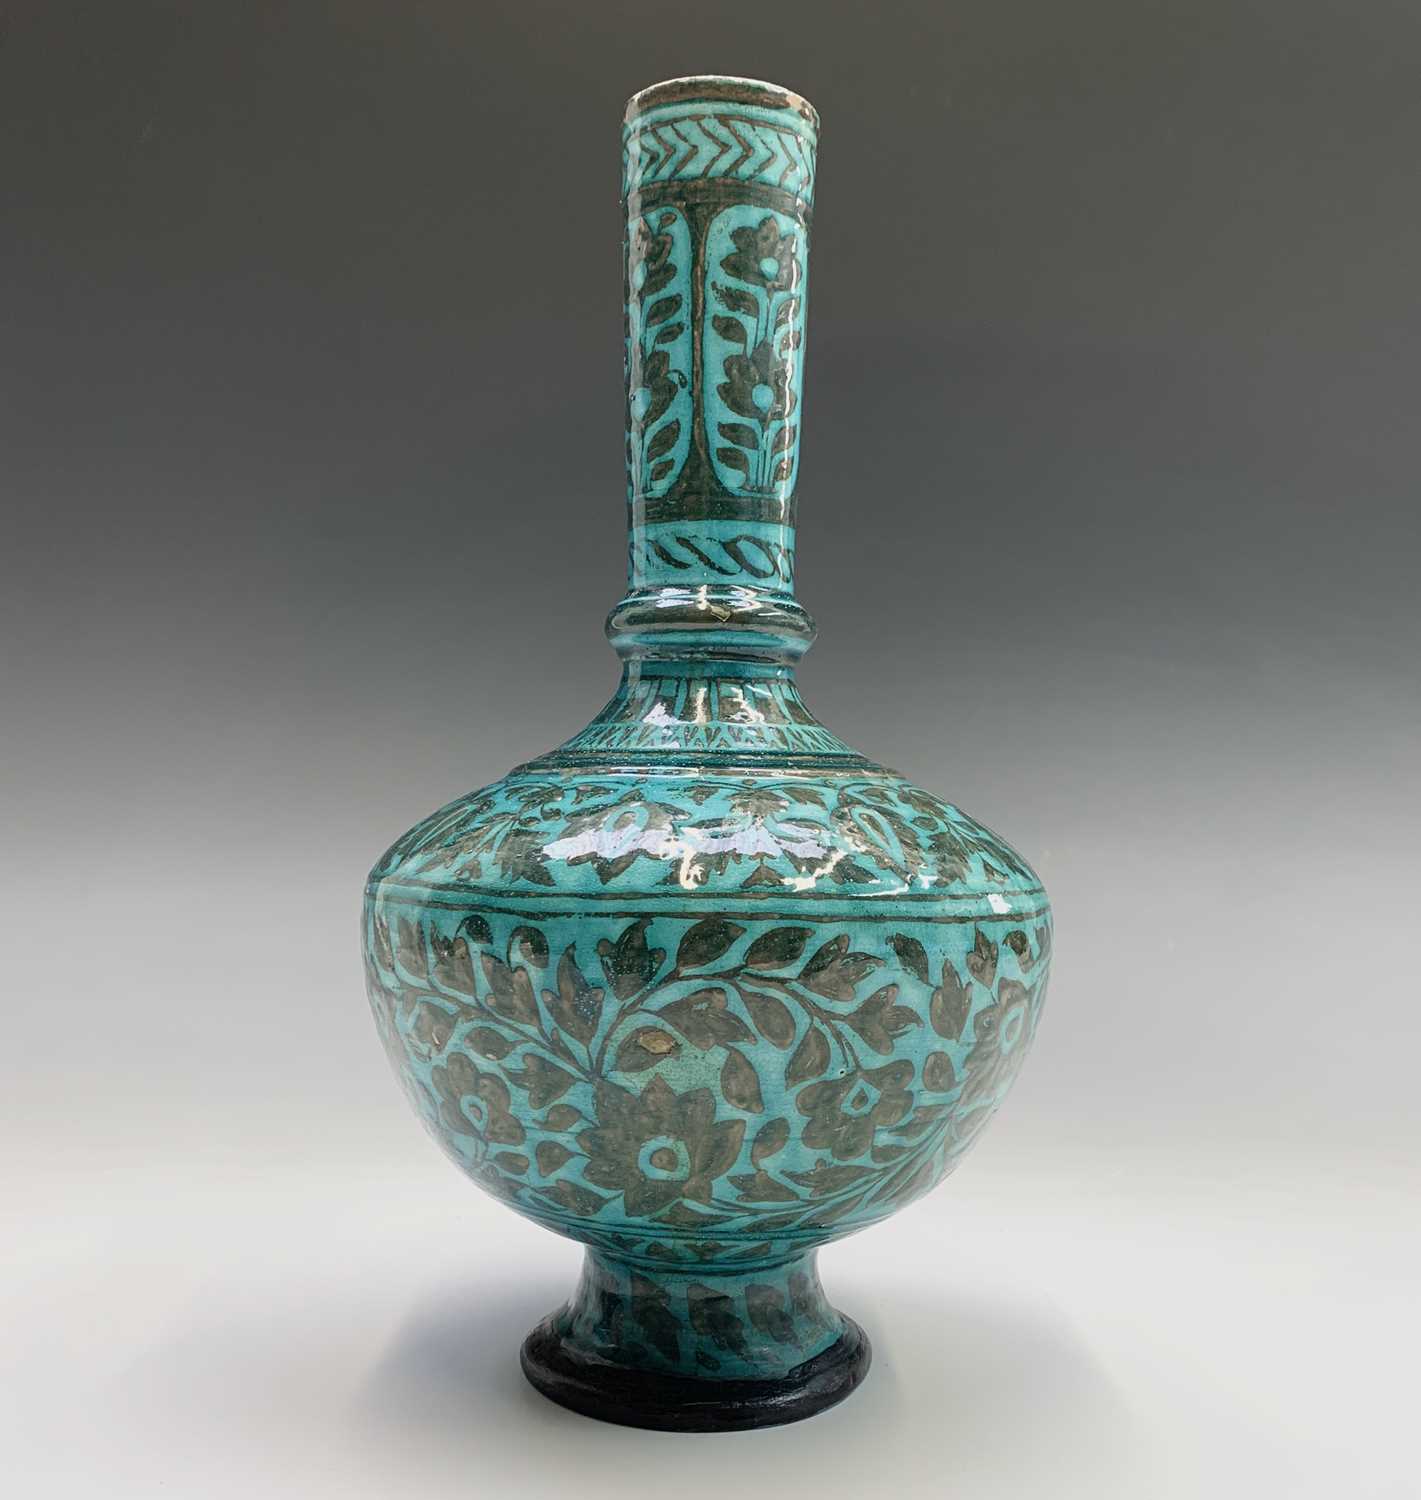 A Persian pottery bottle vase, the turquoise ground with scrolling leafy vines and flowerheads, - Image 2 of 4